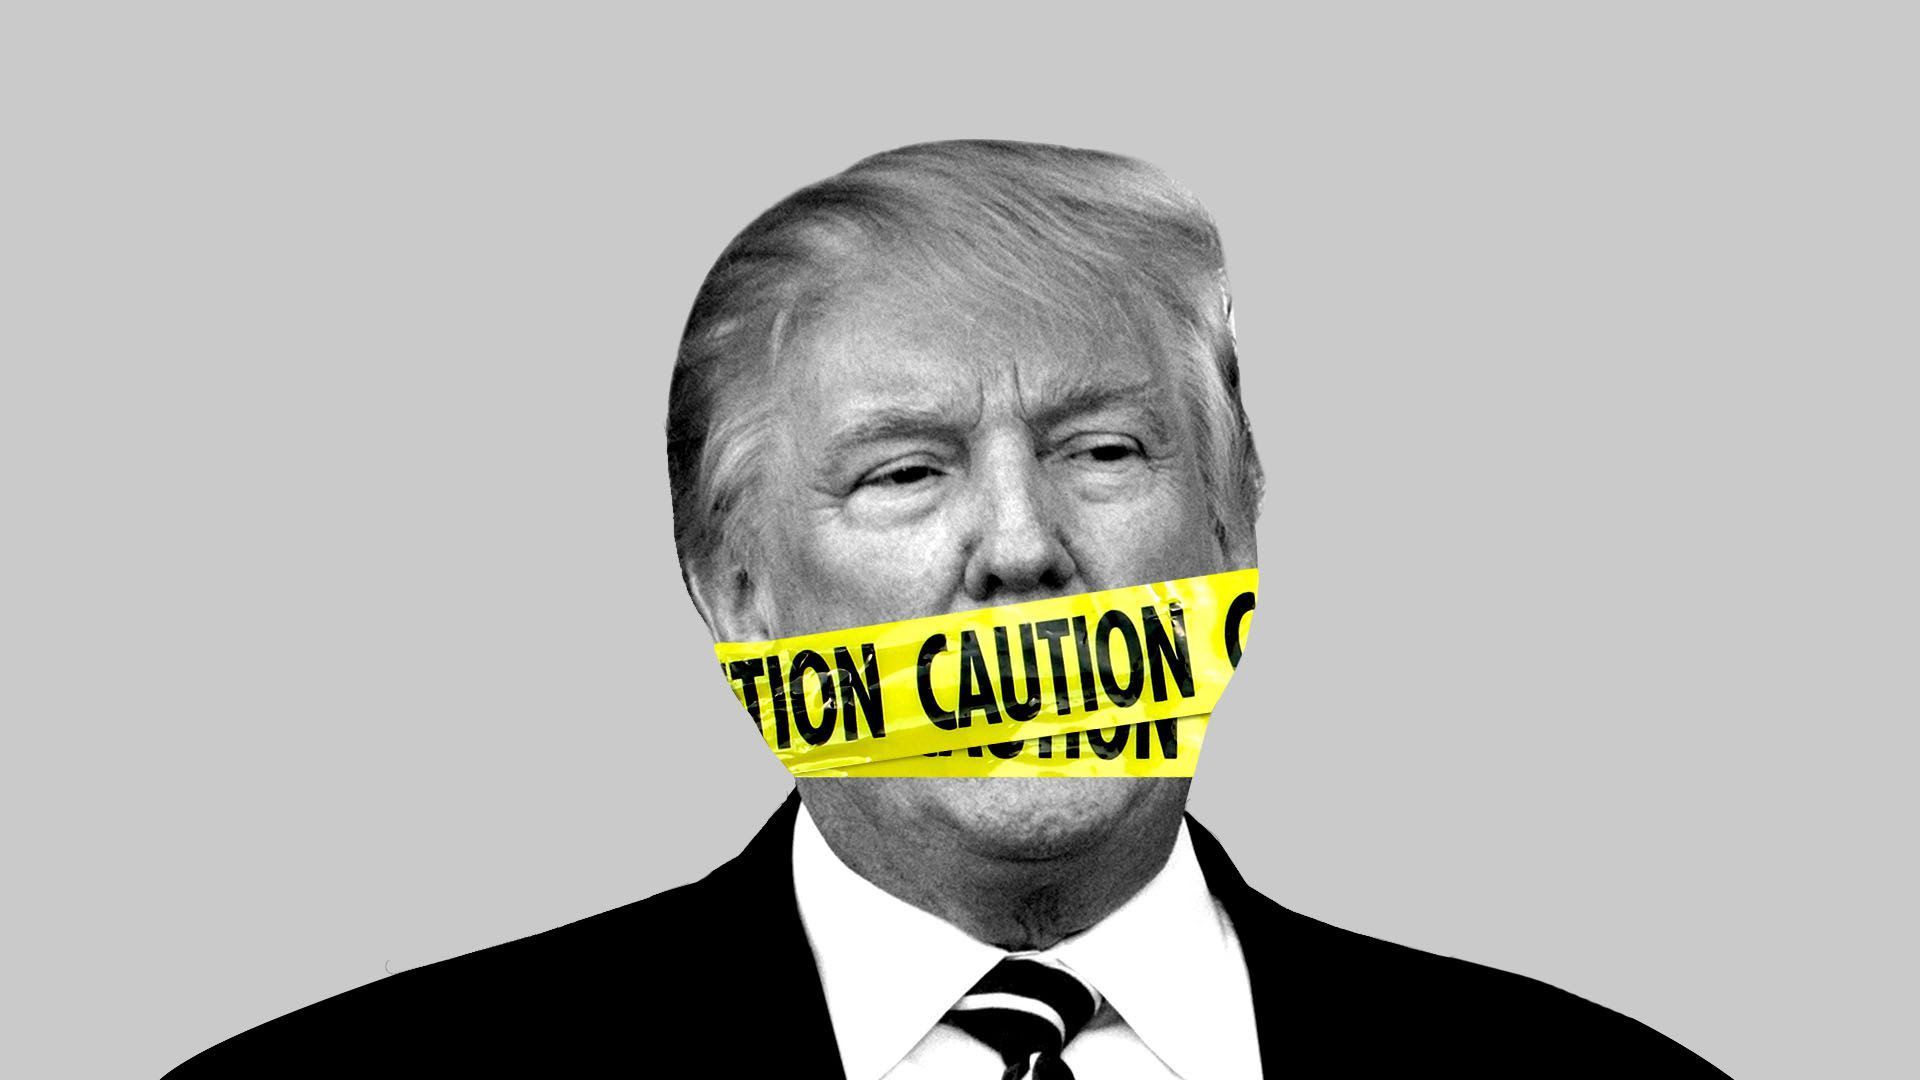 Axios illustration of caution tape wrapped around President Trump's mouth